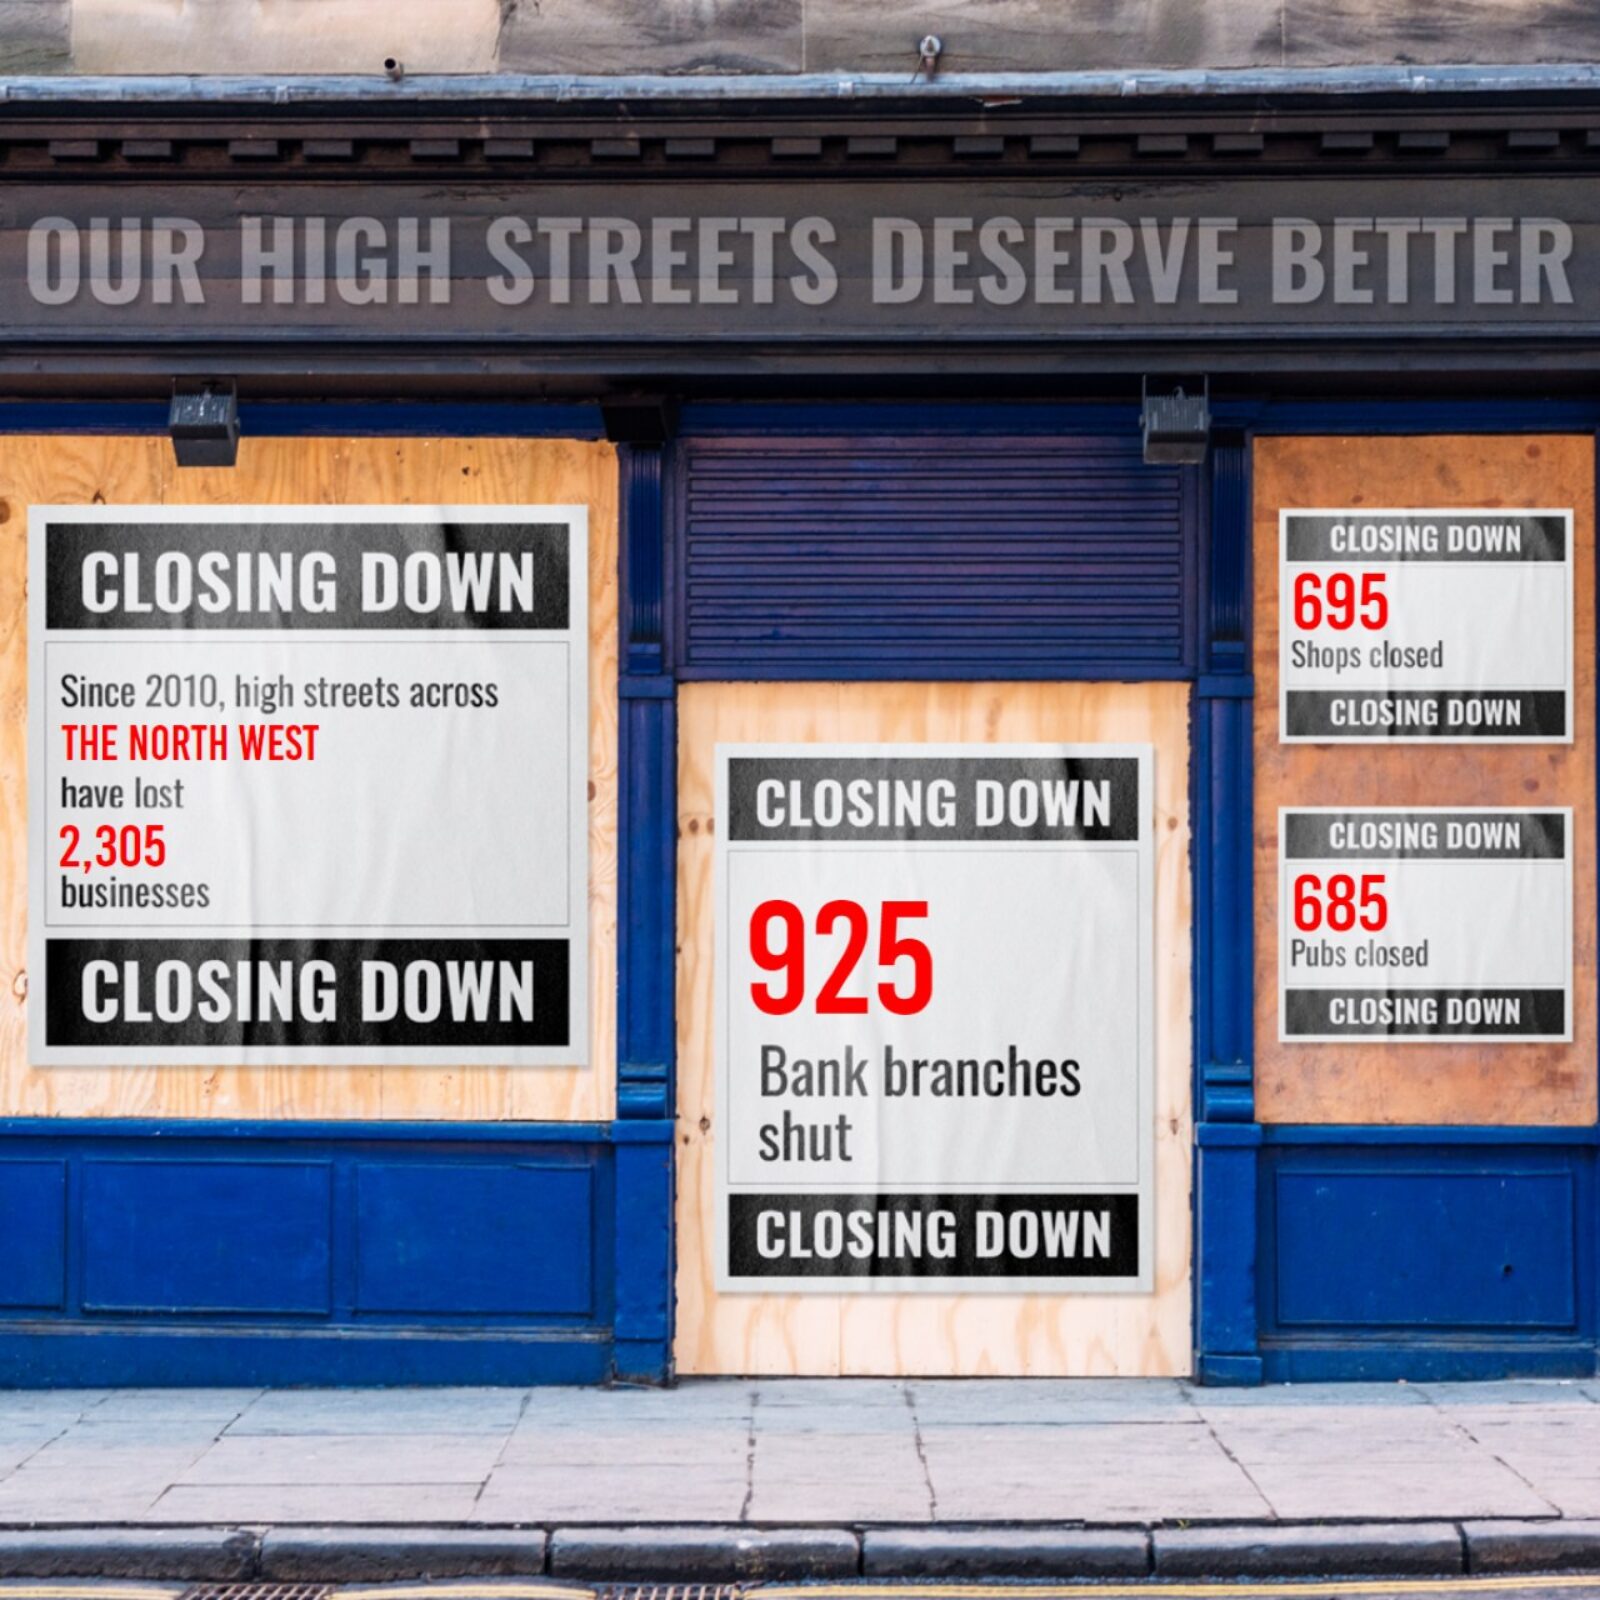 Graphic showing closing down of local businesses 